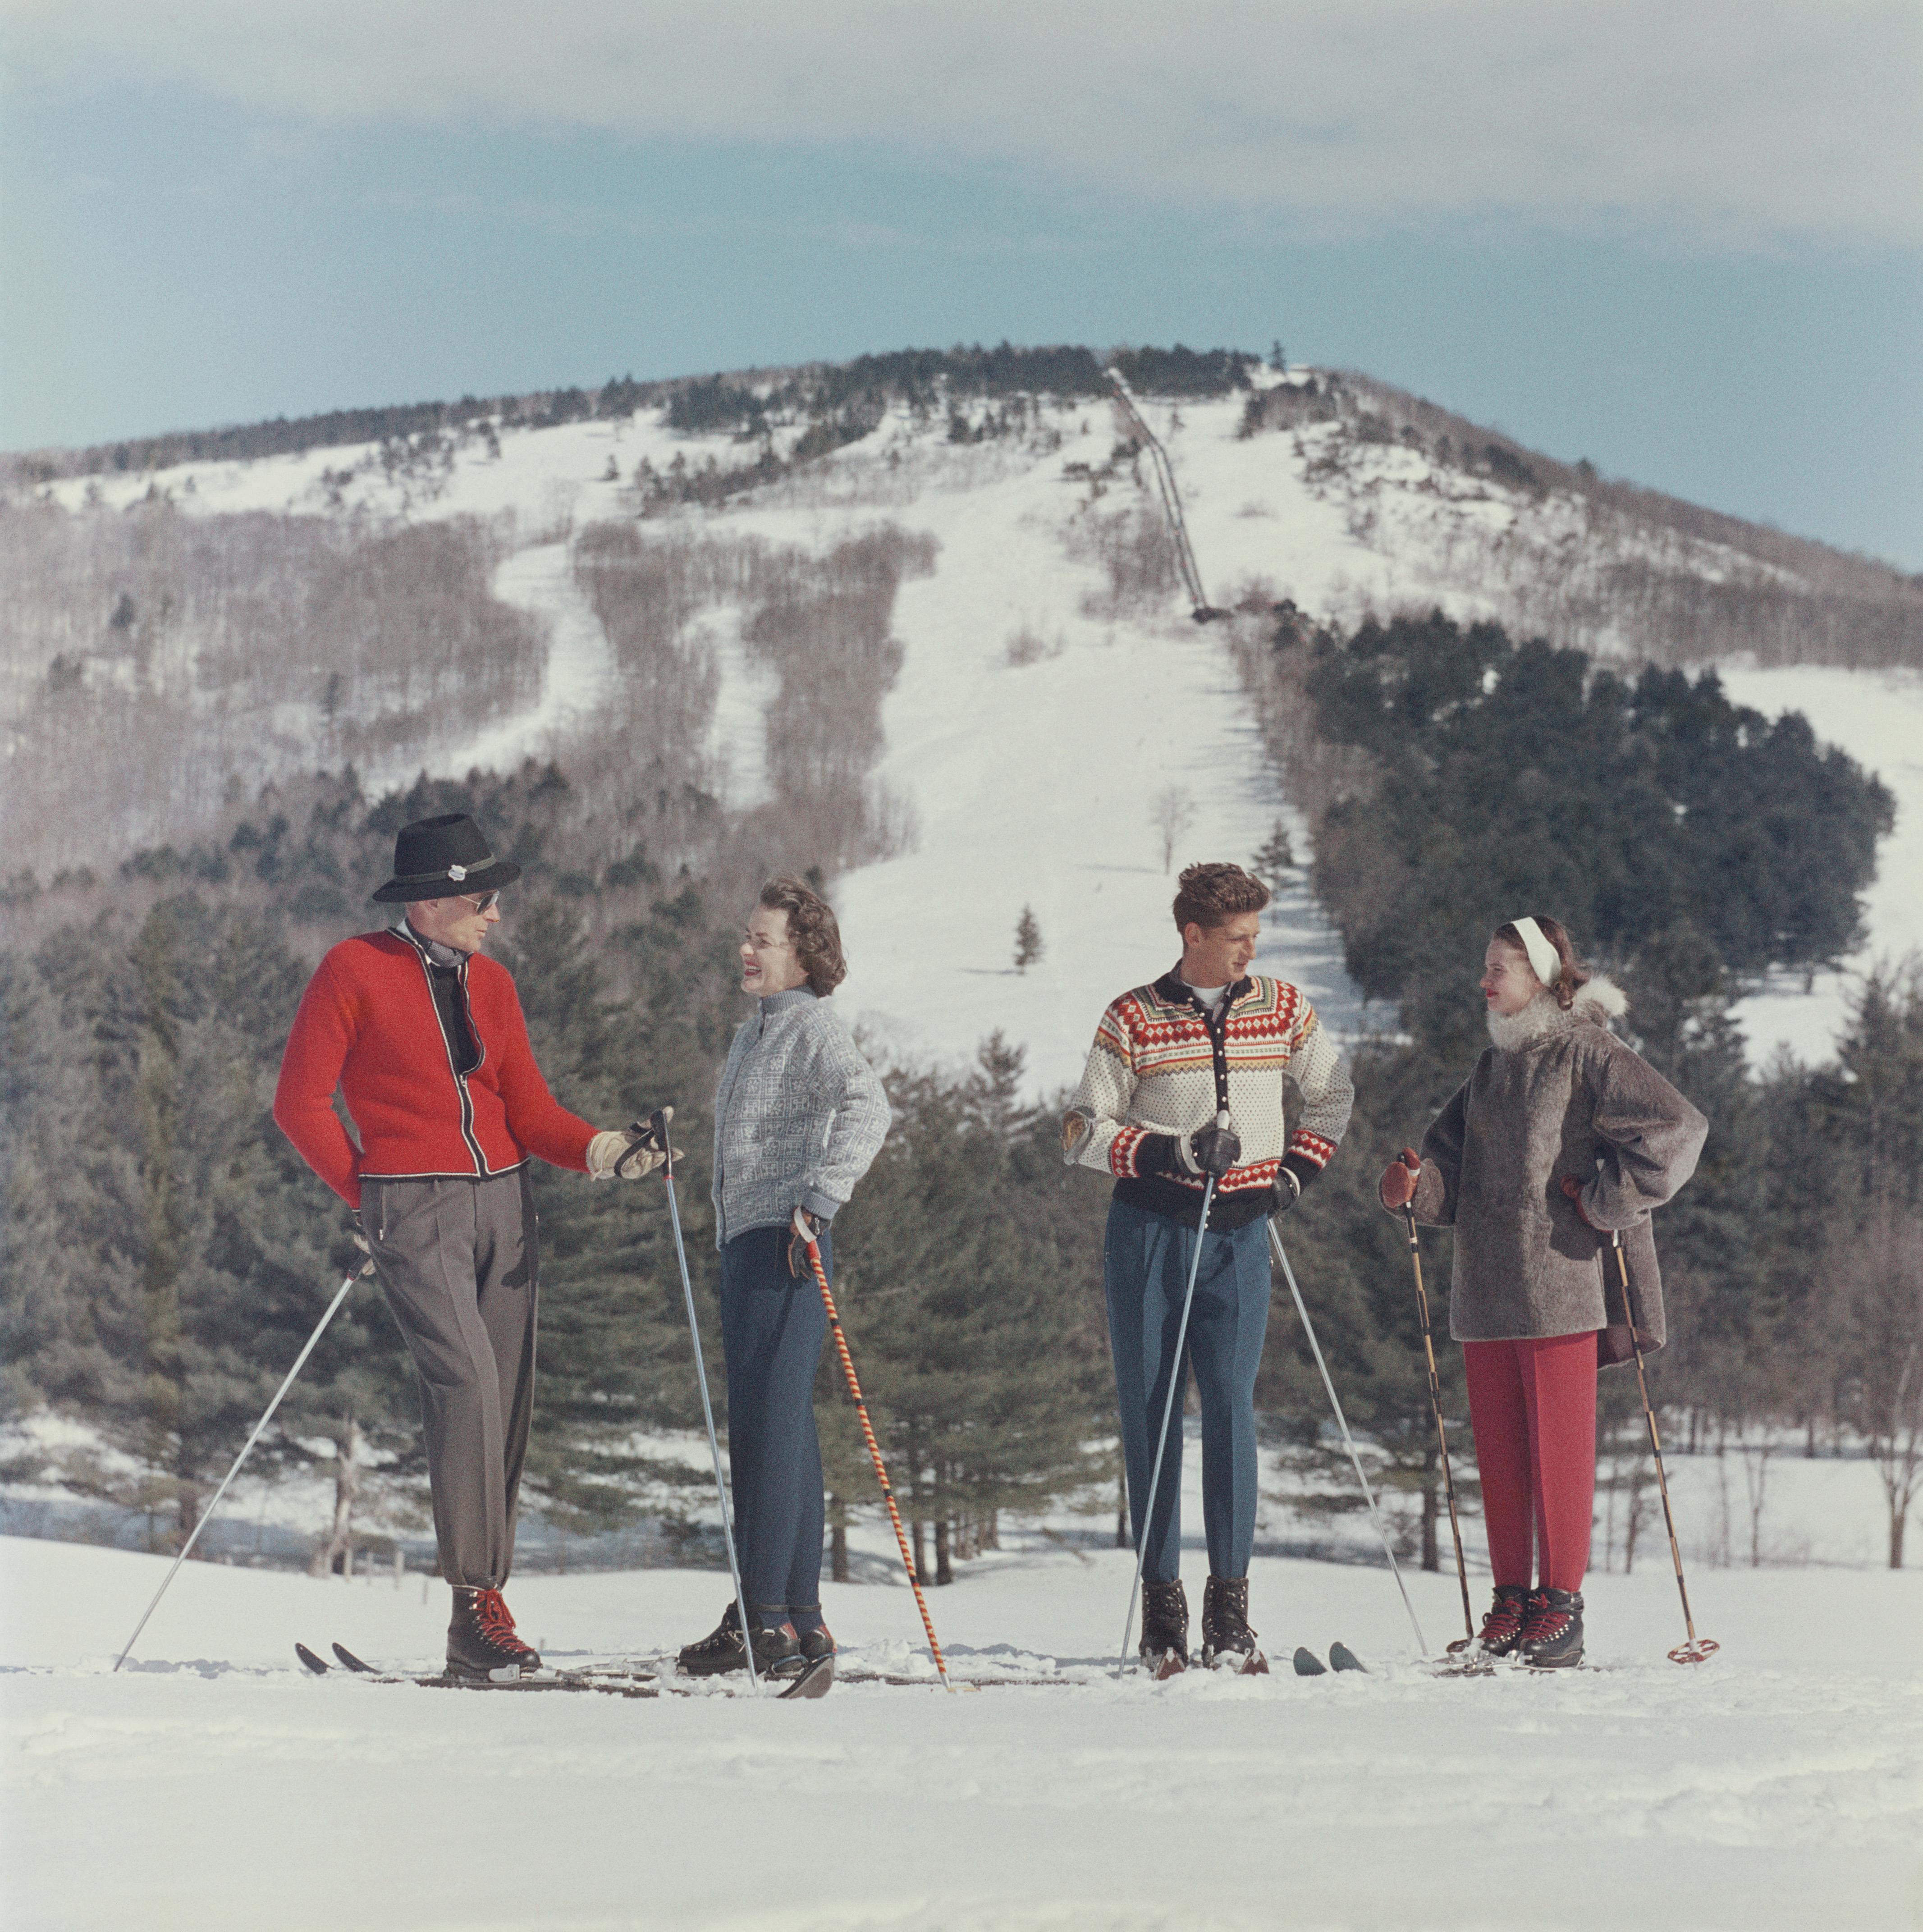 Skiing In New Hampshire
1955 (printed later)
C-print
Estate stamped and hand numbered edition of 150 with certificate of authenticity from the estate. 

Skiers at the Cranmore Mountain Resort, North Conway, New Hampshire, USA, circa 1955.

Slim